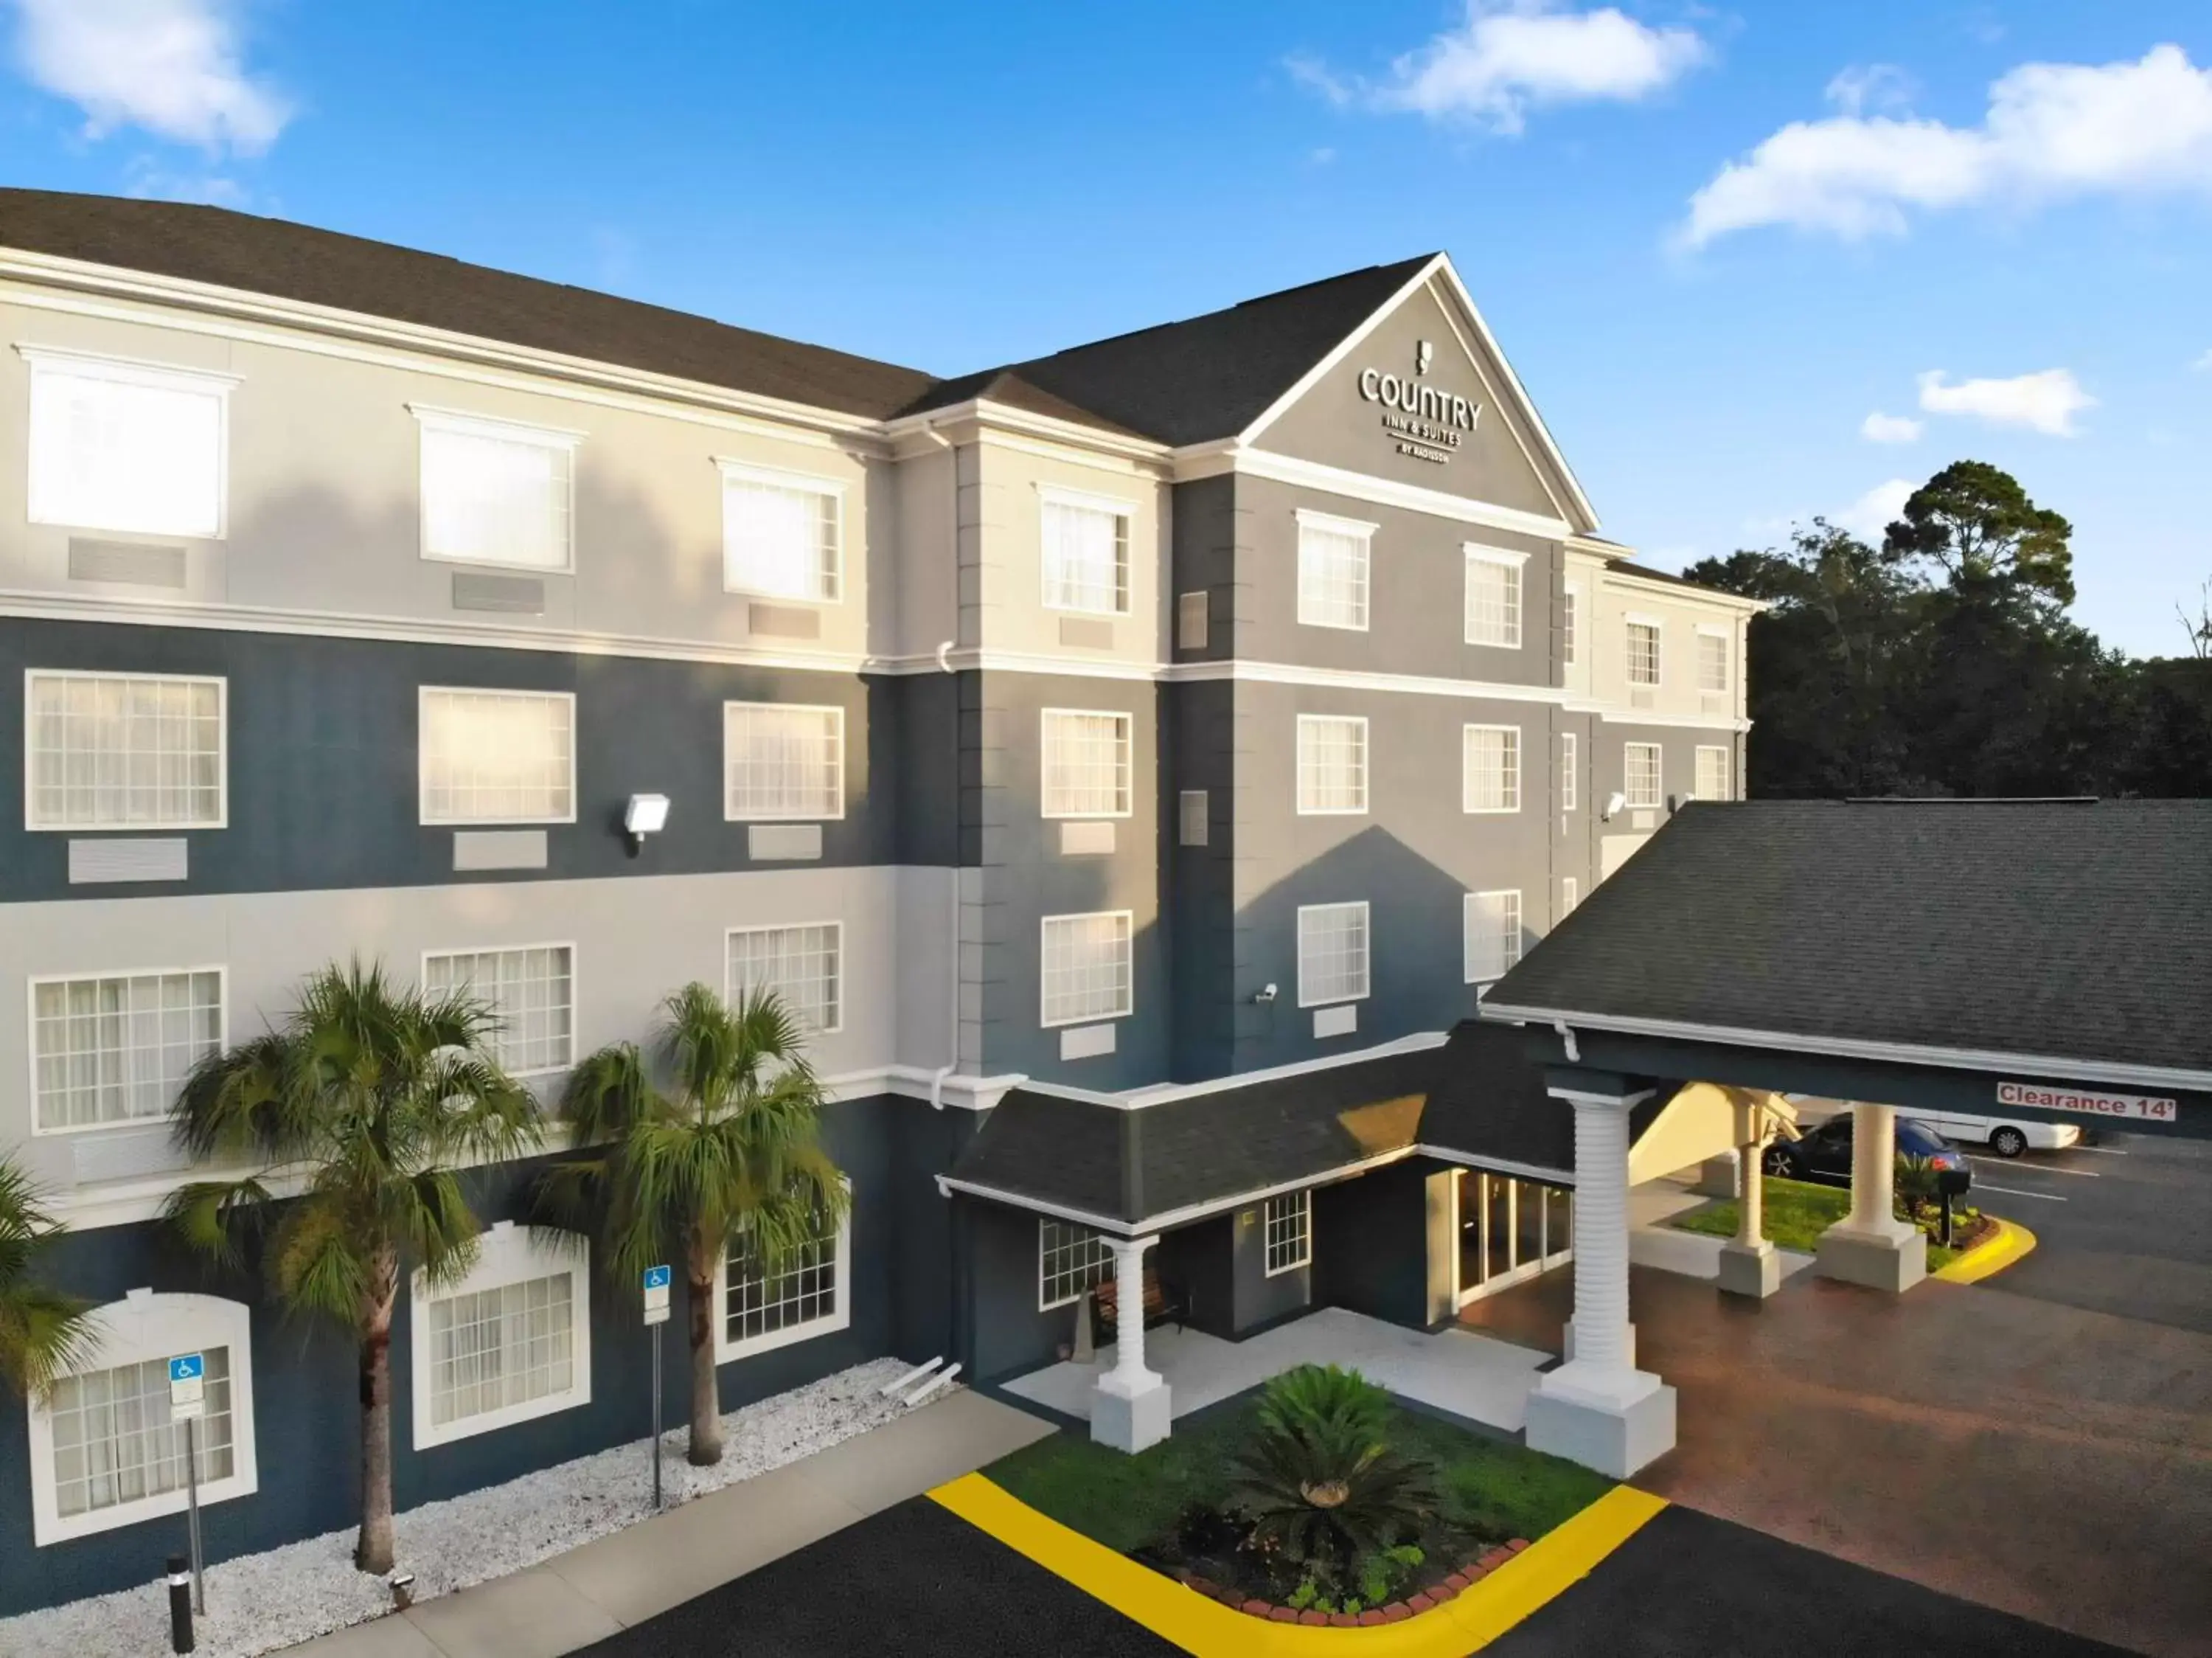 Property building in Country Inn & Suites by Radisson, Pensacola West, FL